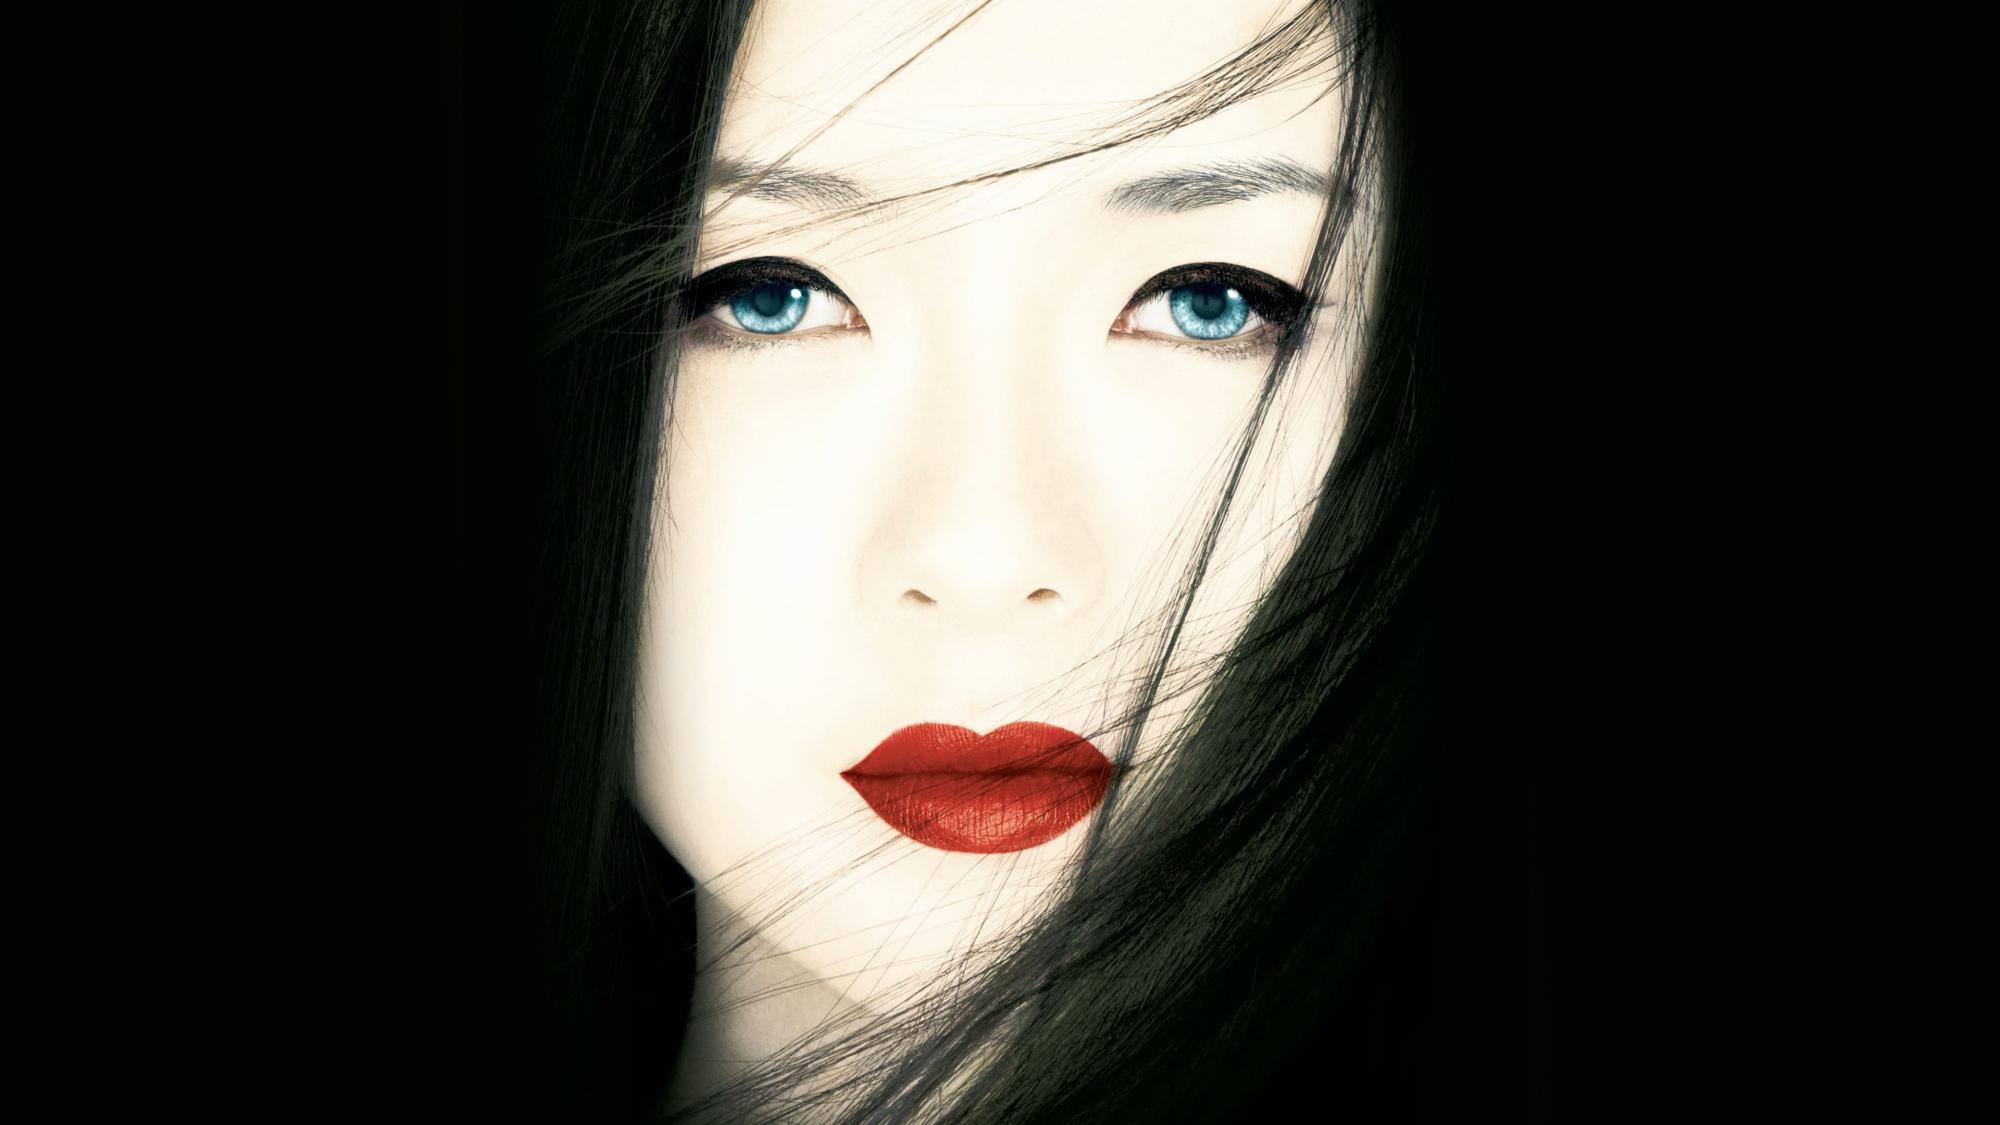 Backdrop Image for Memoirs of a Geisha